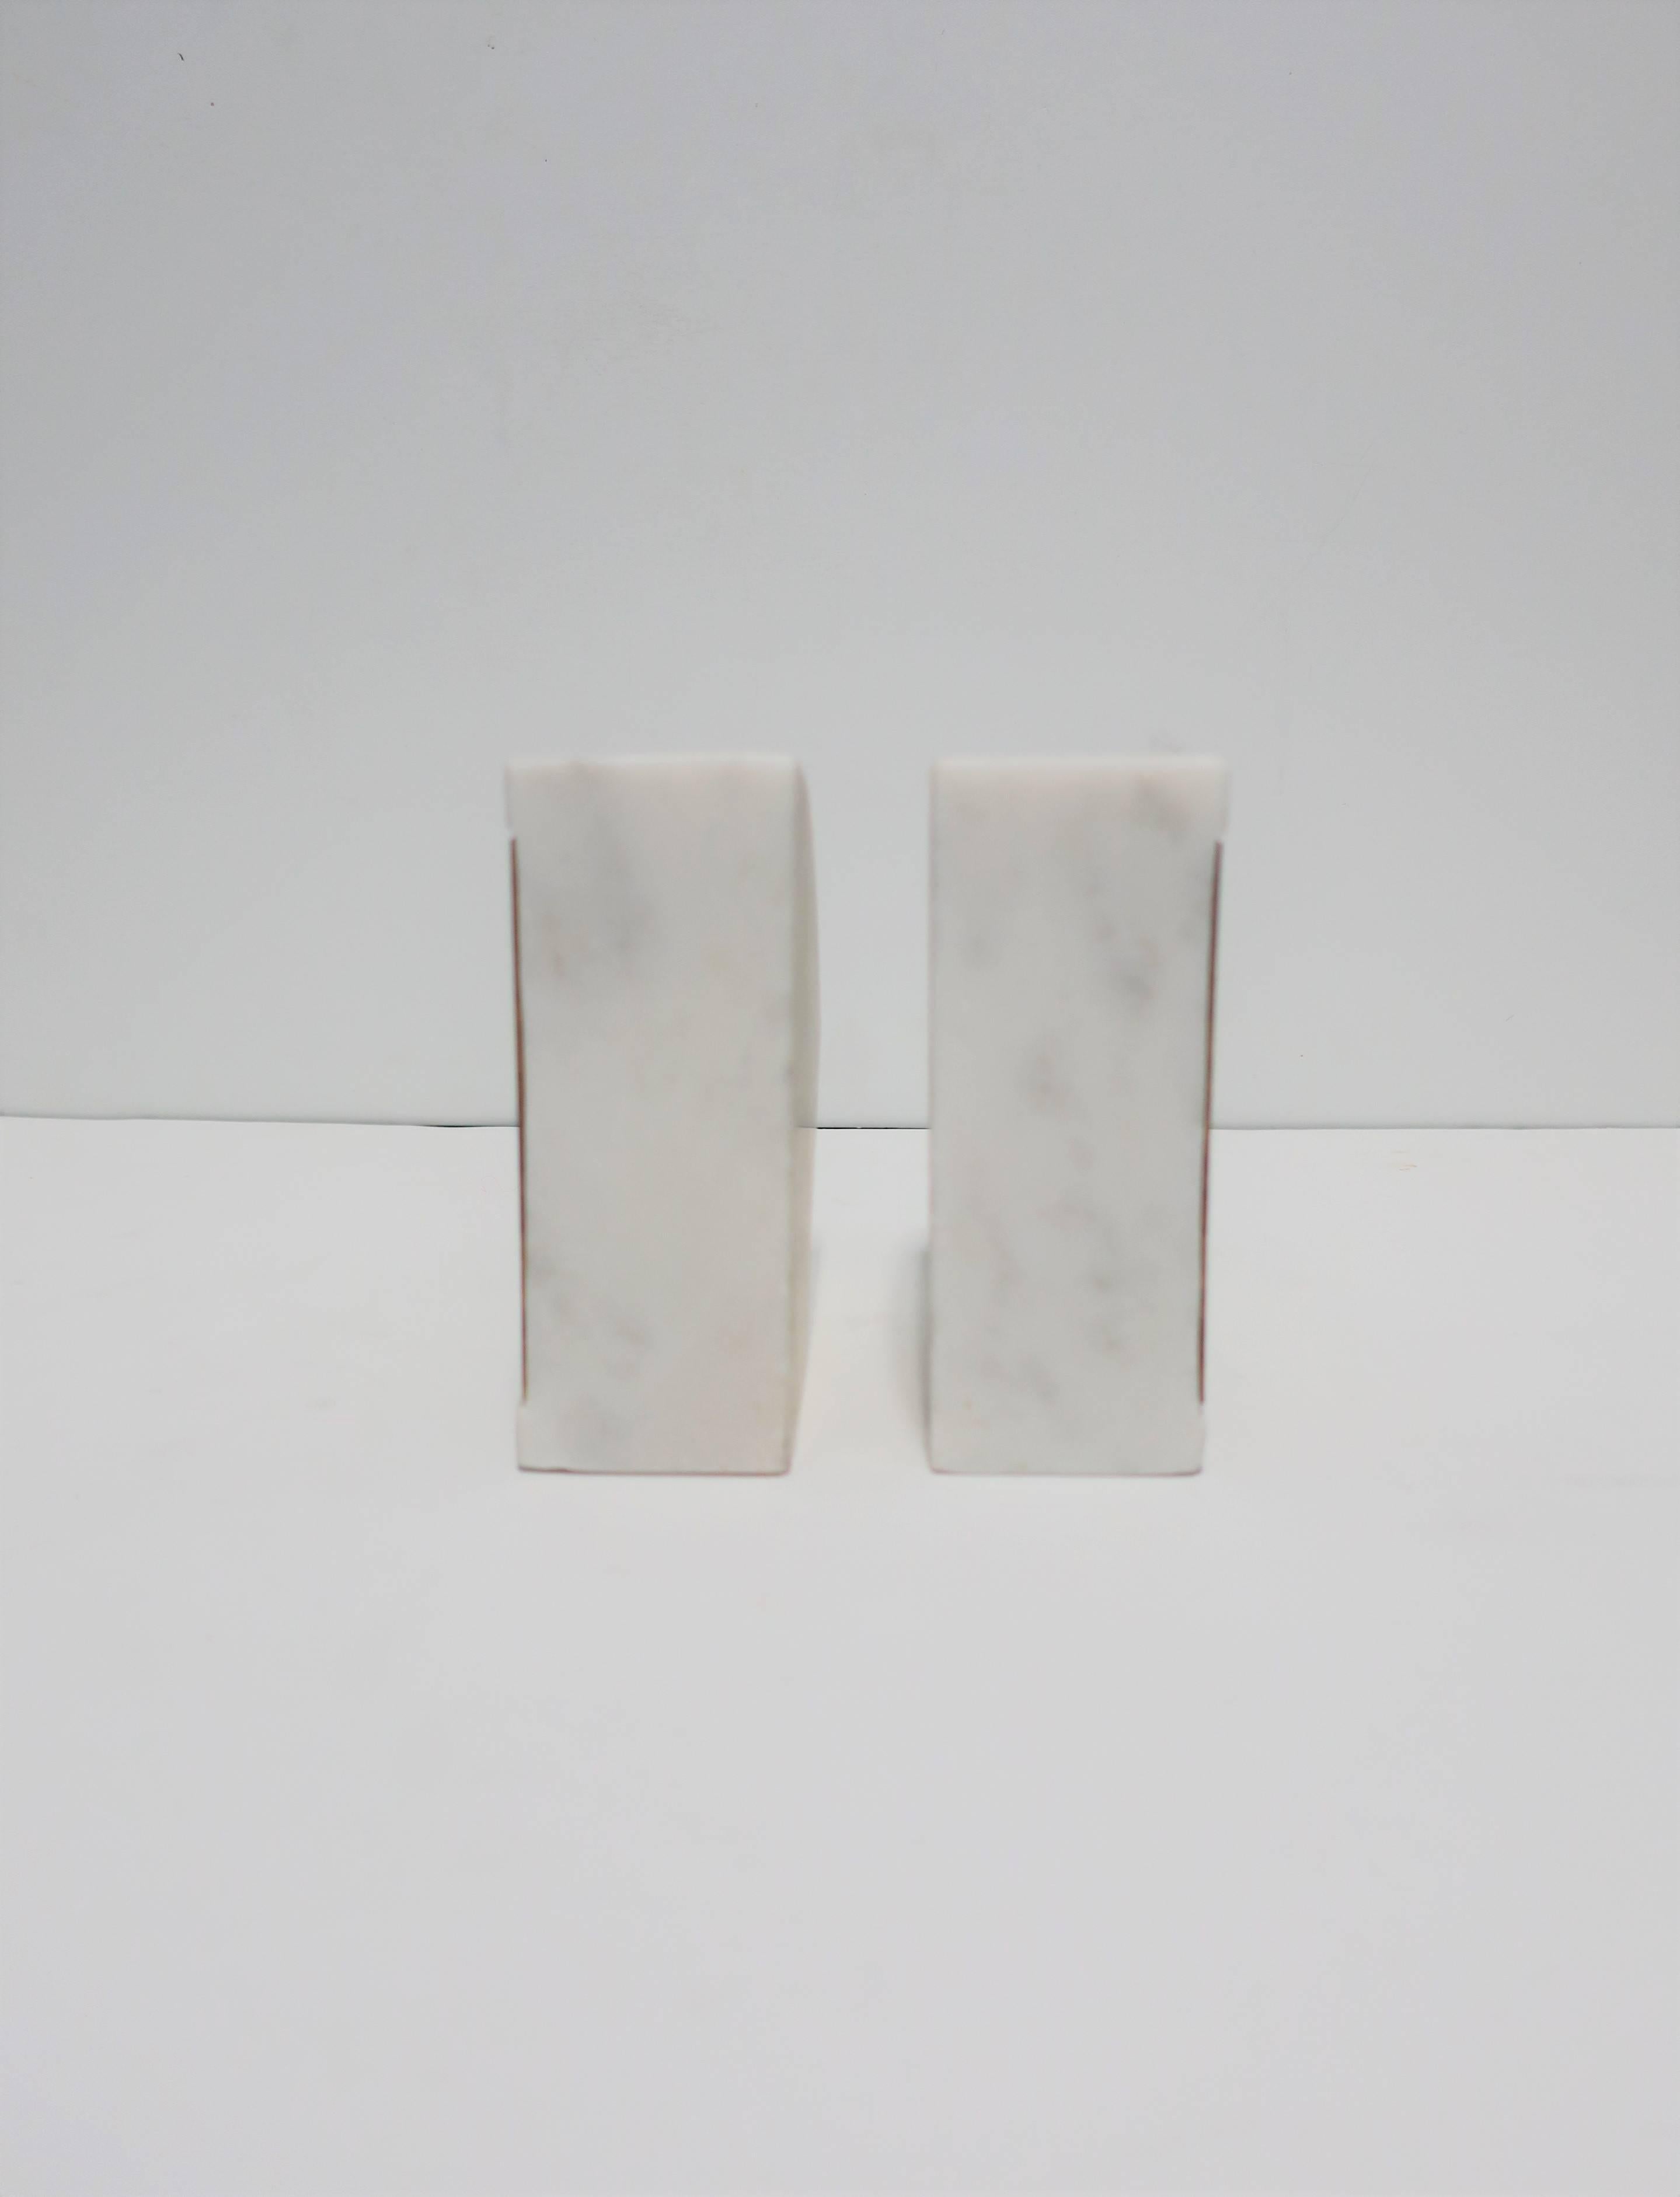 Metal White and Gold Marble Bookends or Decorative Object Sculpture